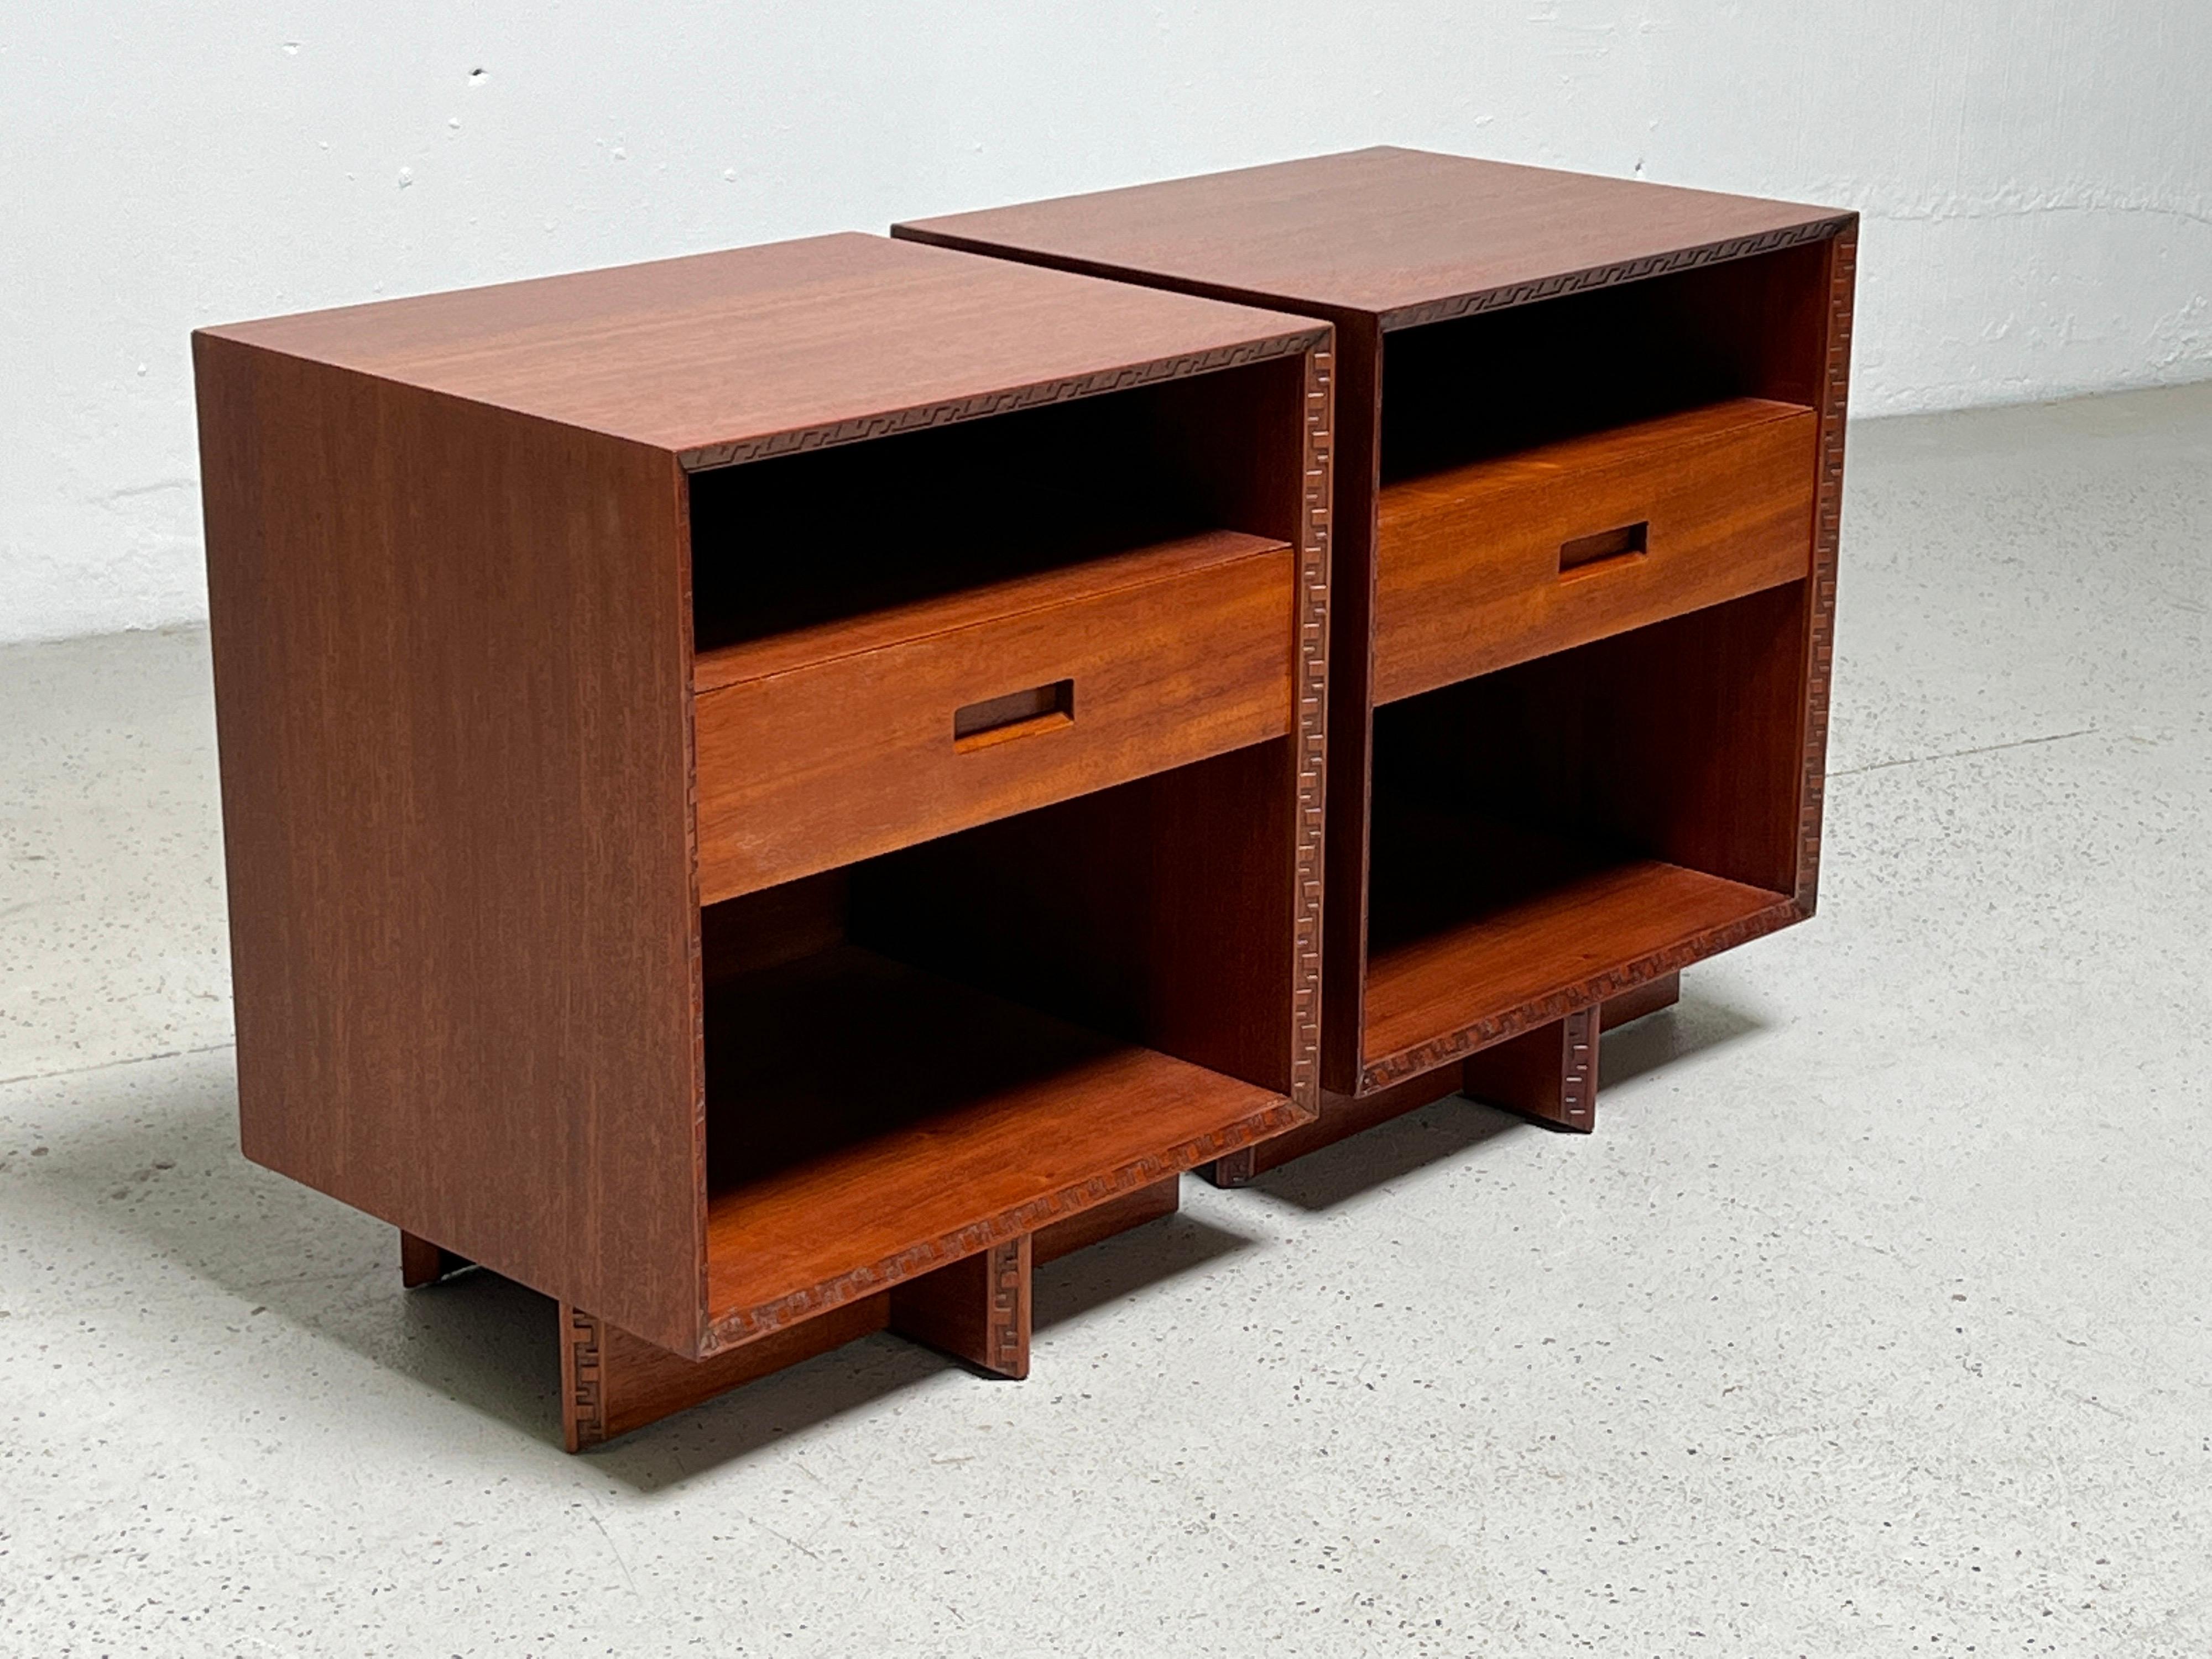 A pair of mahogany bedside tables designed by Frank Lloyd Wright for Henredon.